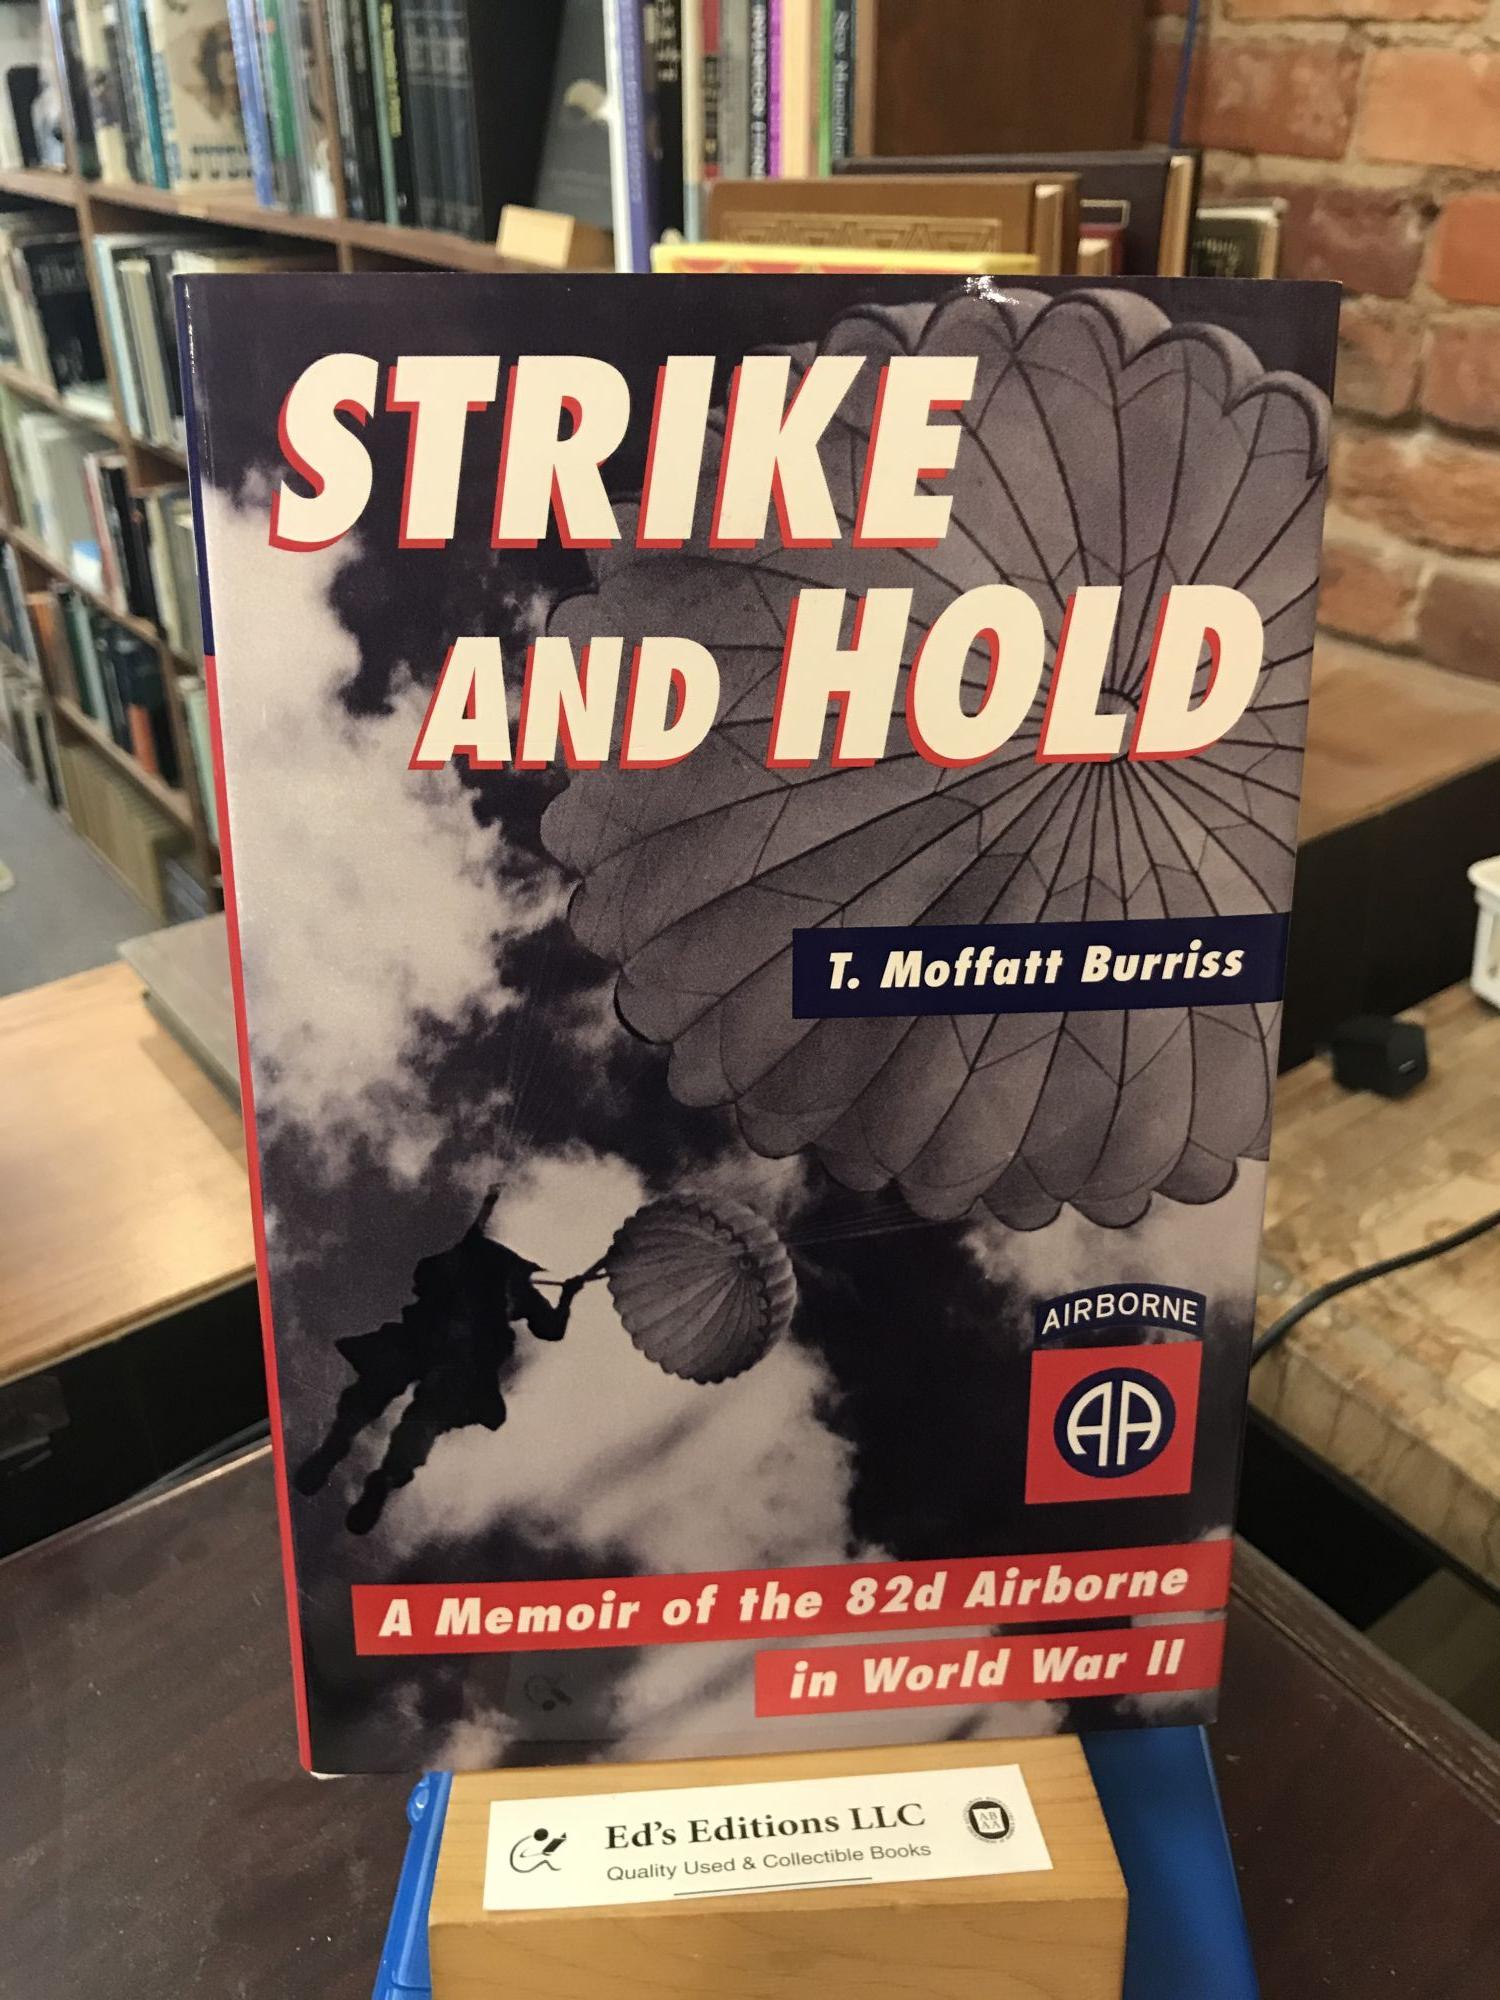  Strike and Hold: A Memoir of the 82nd Airborne in